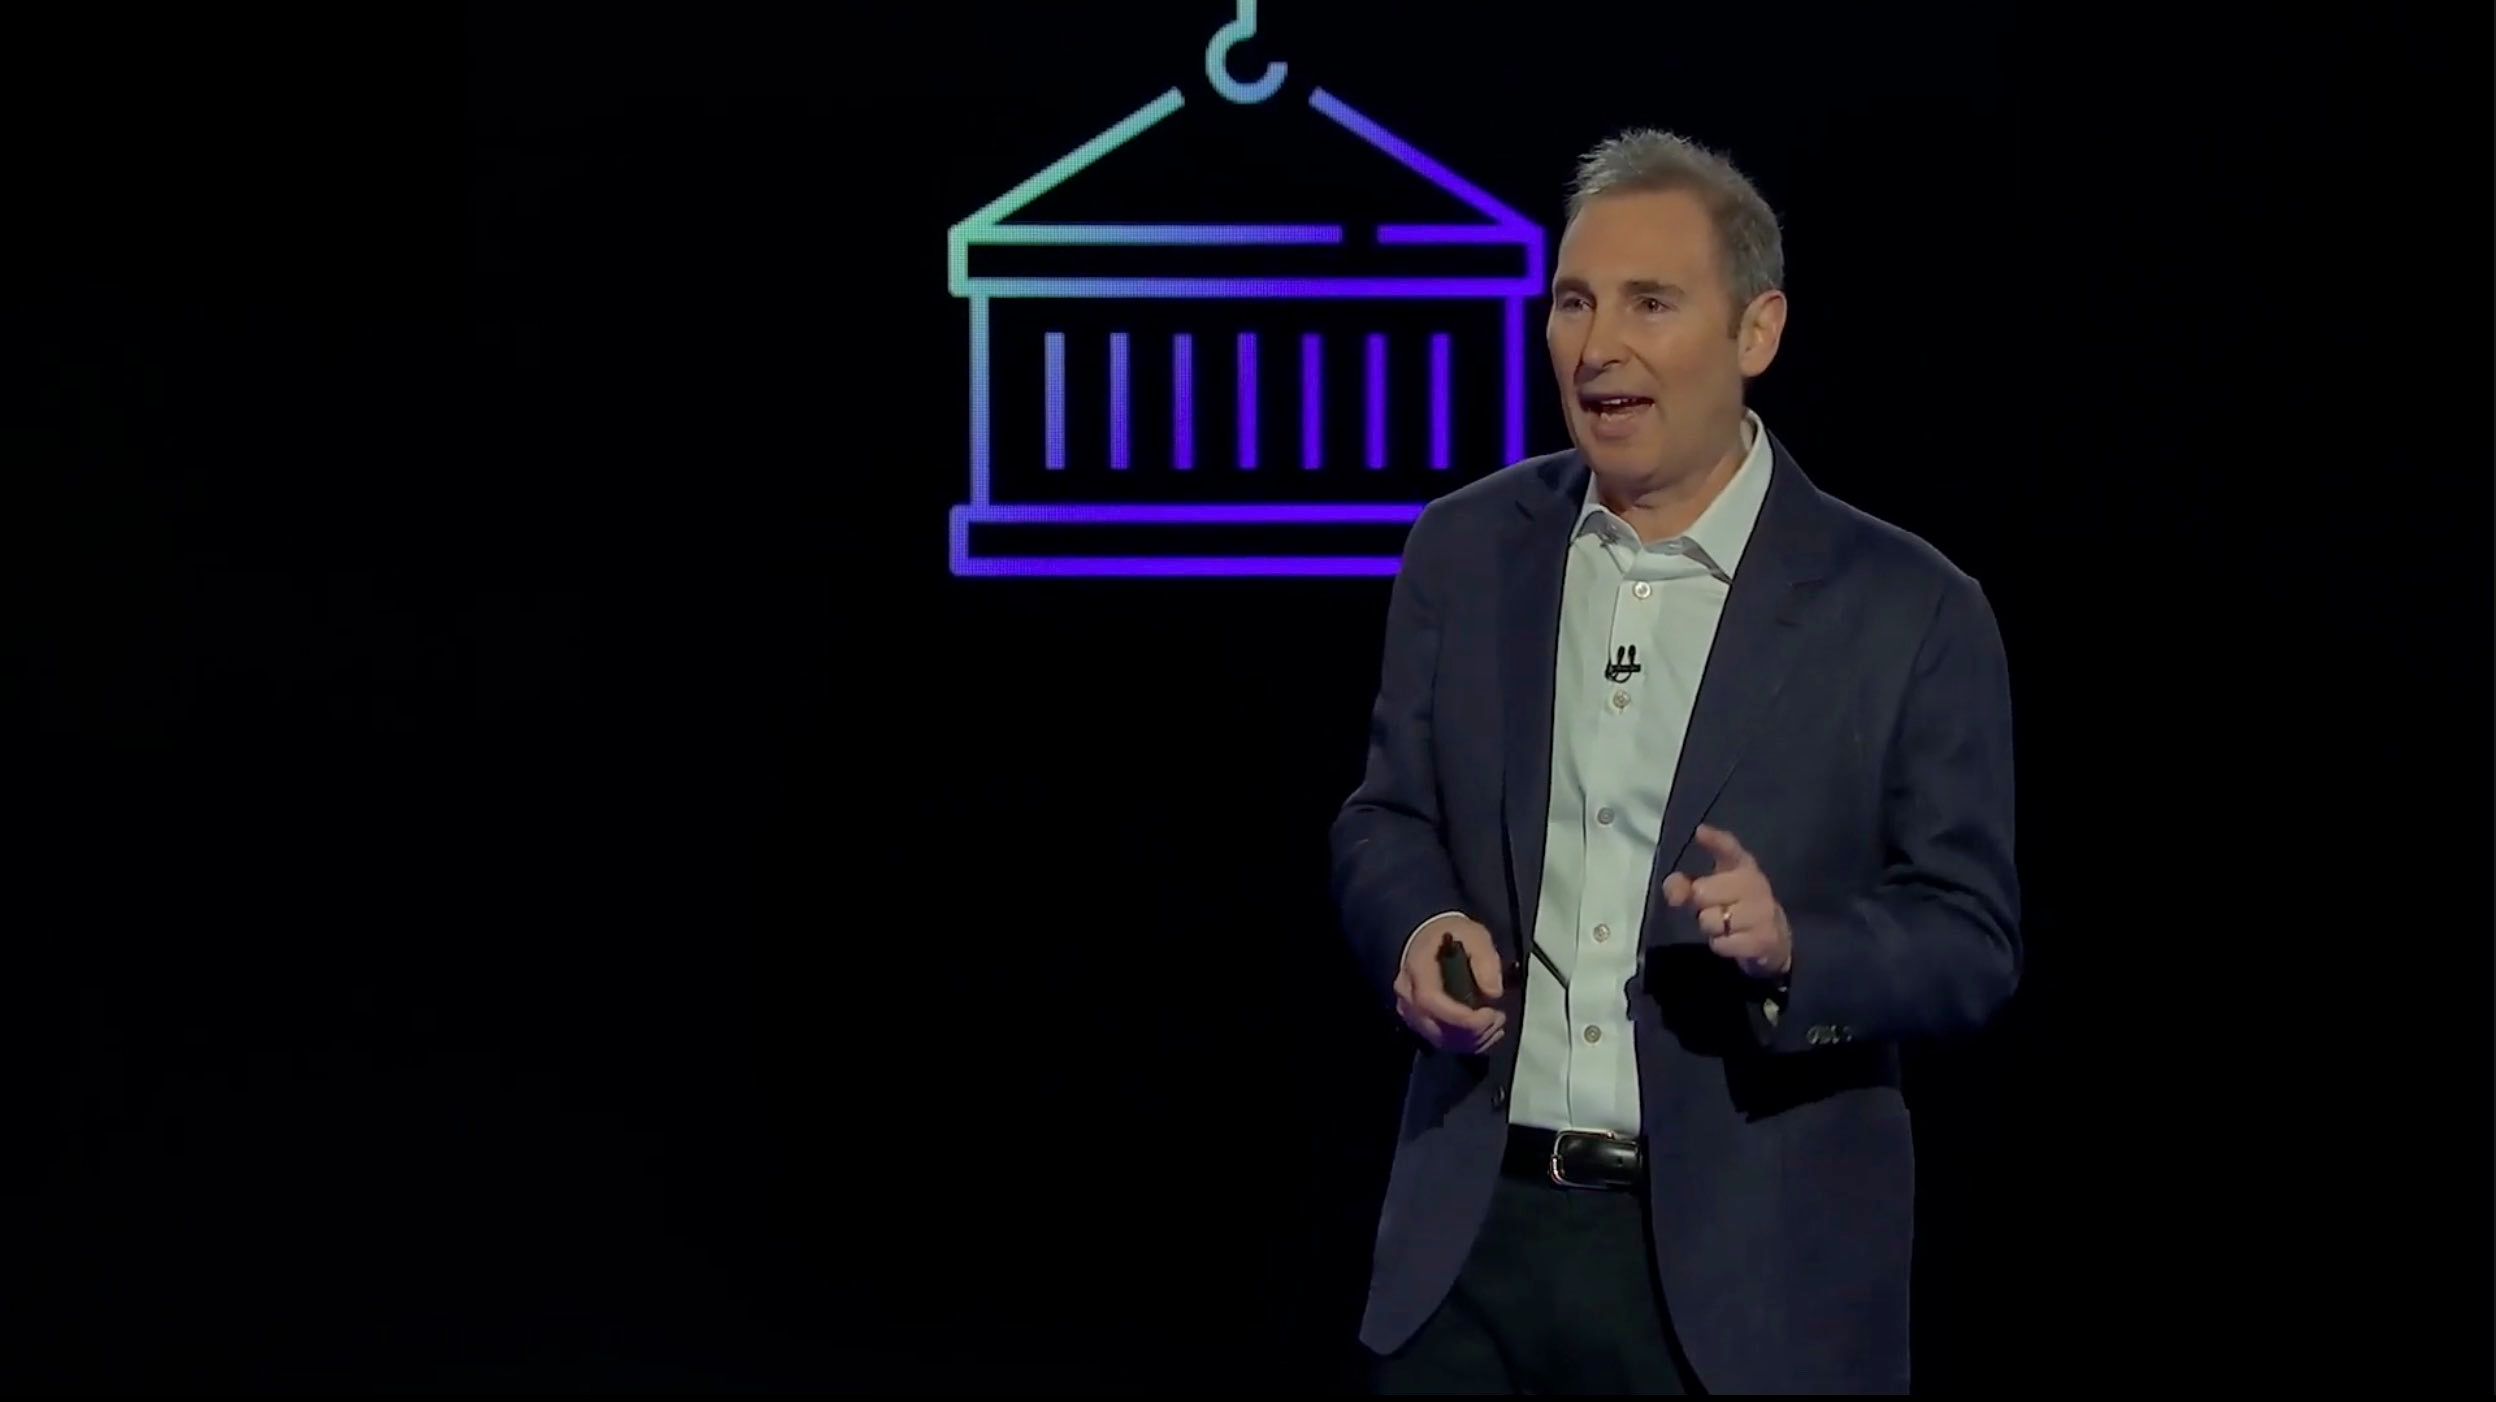 Meet the new CEO of Amazon – Andy Jassy